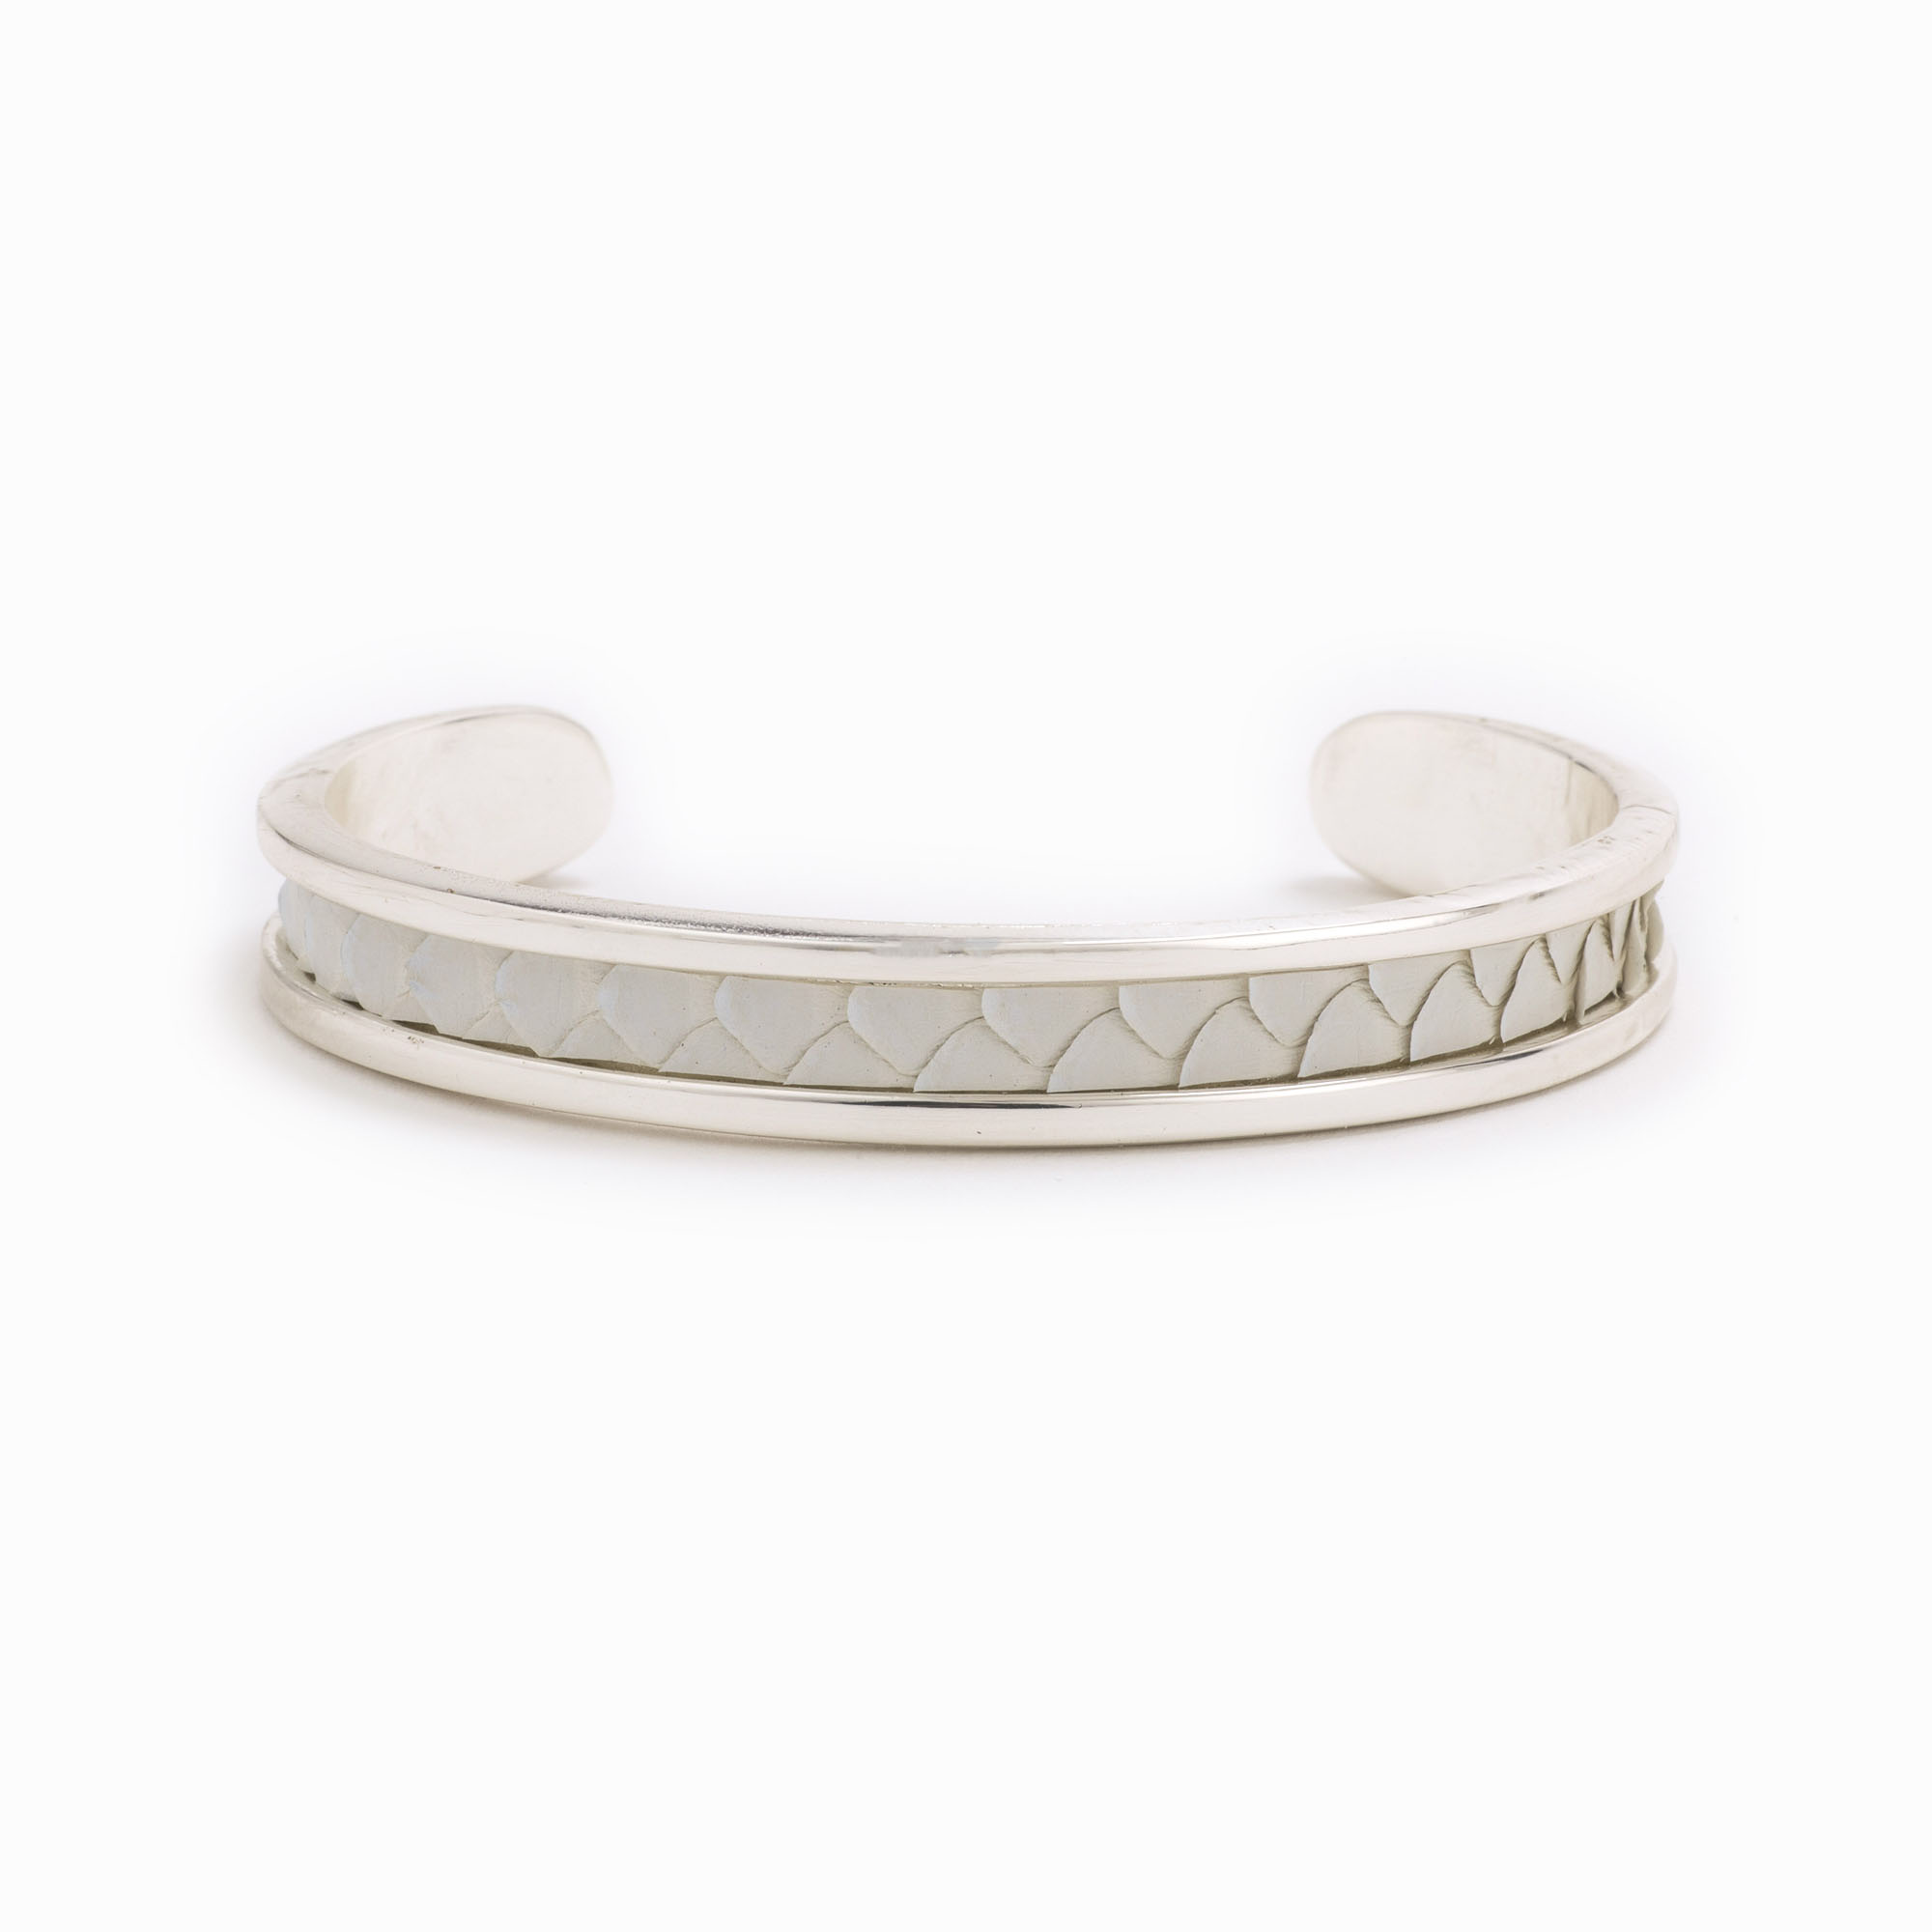 A small silver cuff with white colored snakeskin pattern inlaid.